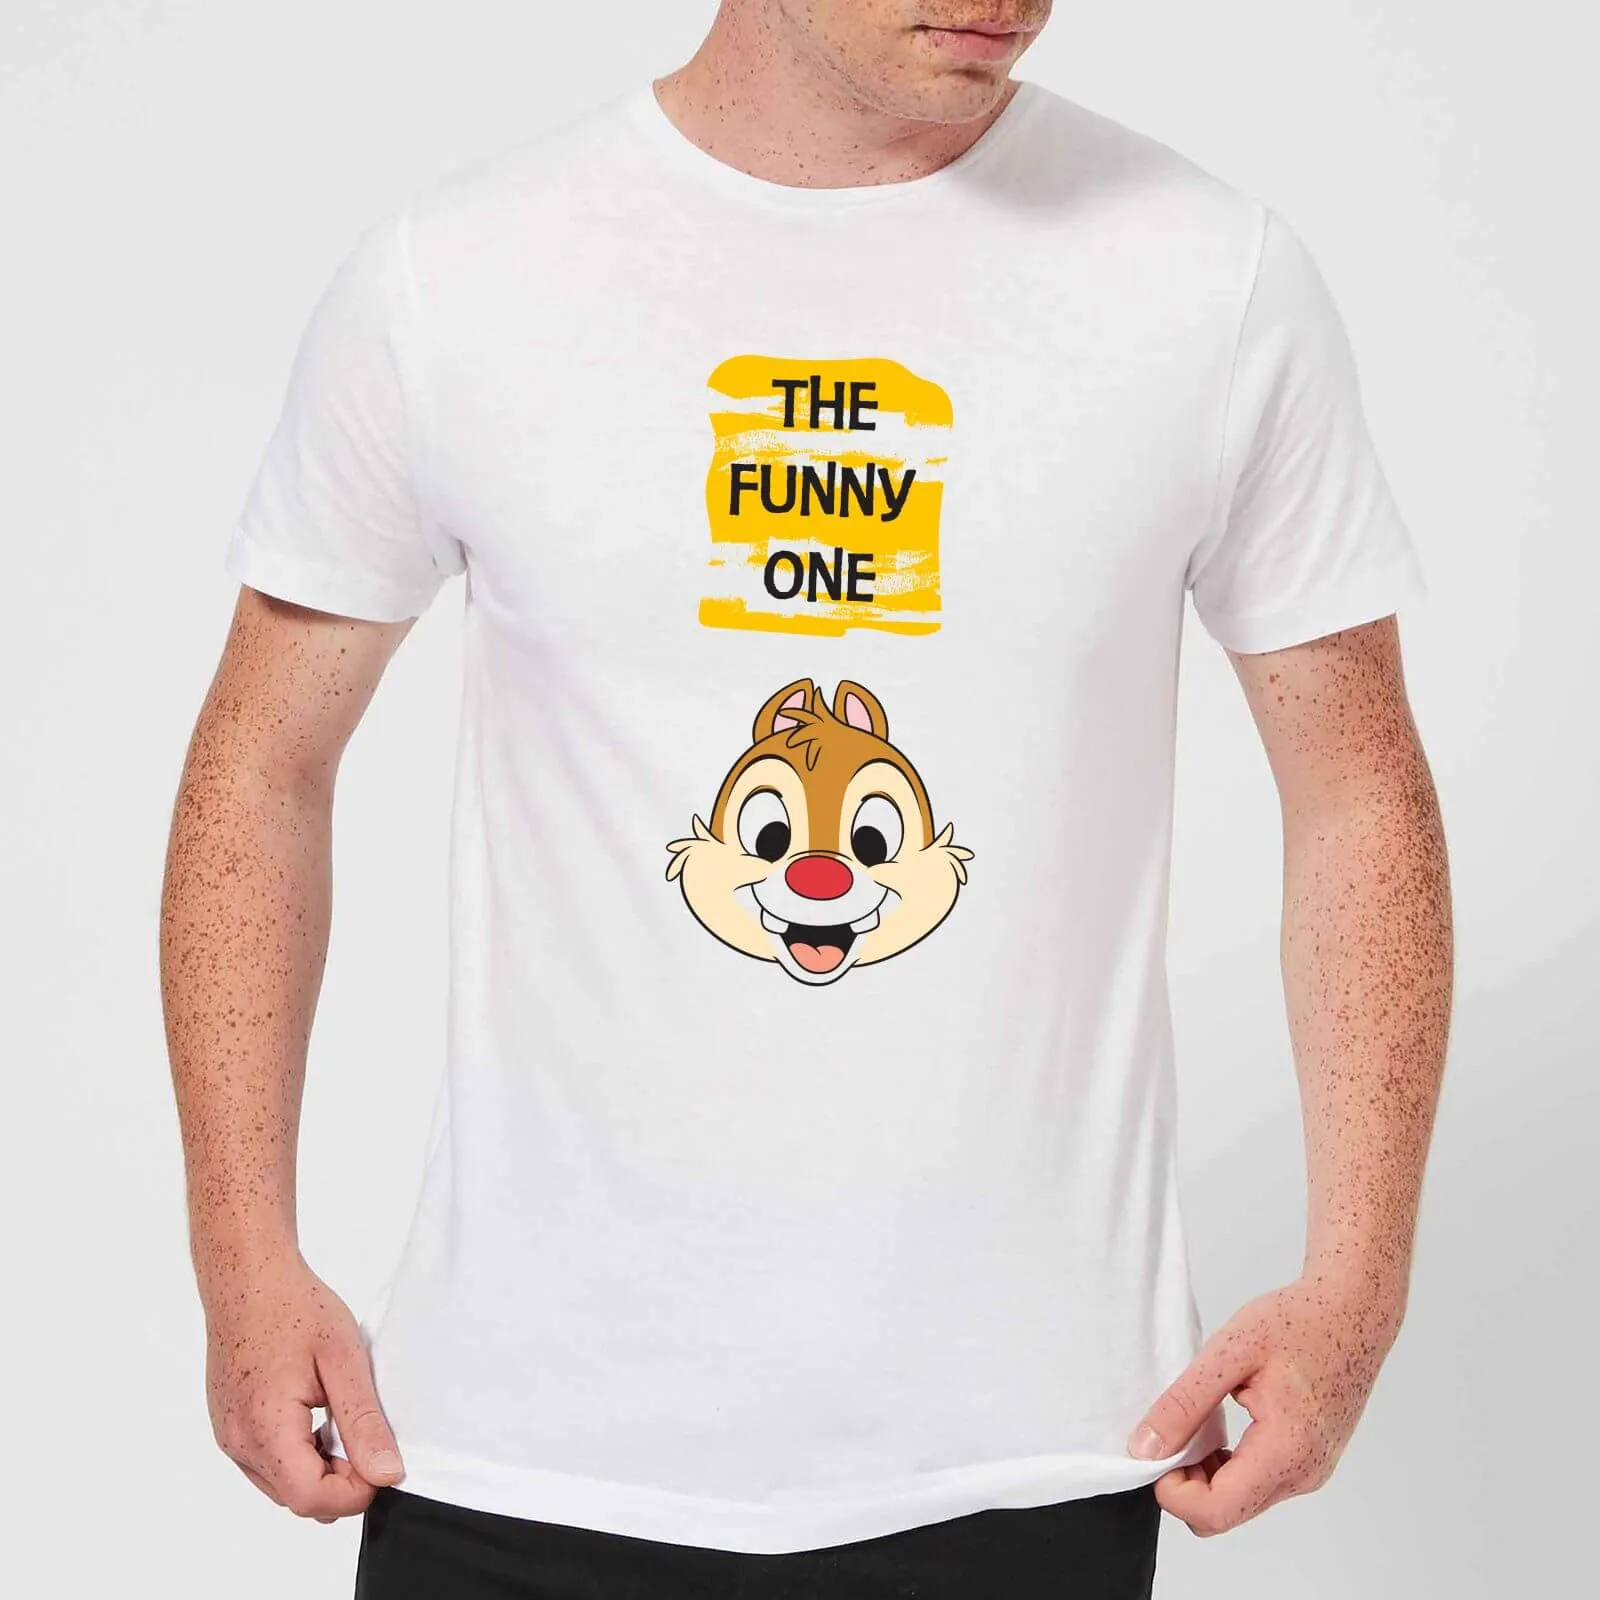  Chip 'N' Dale The Funny One Men's T-Shirt - White - XXL